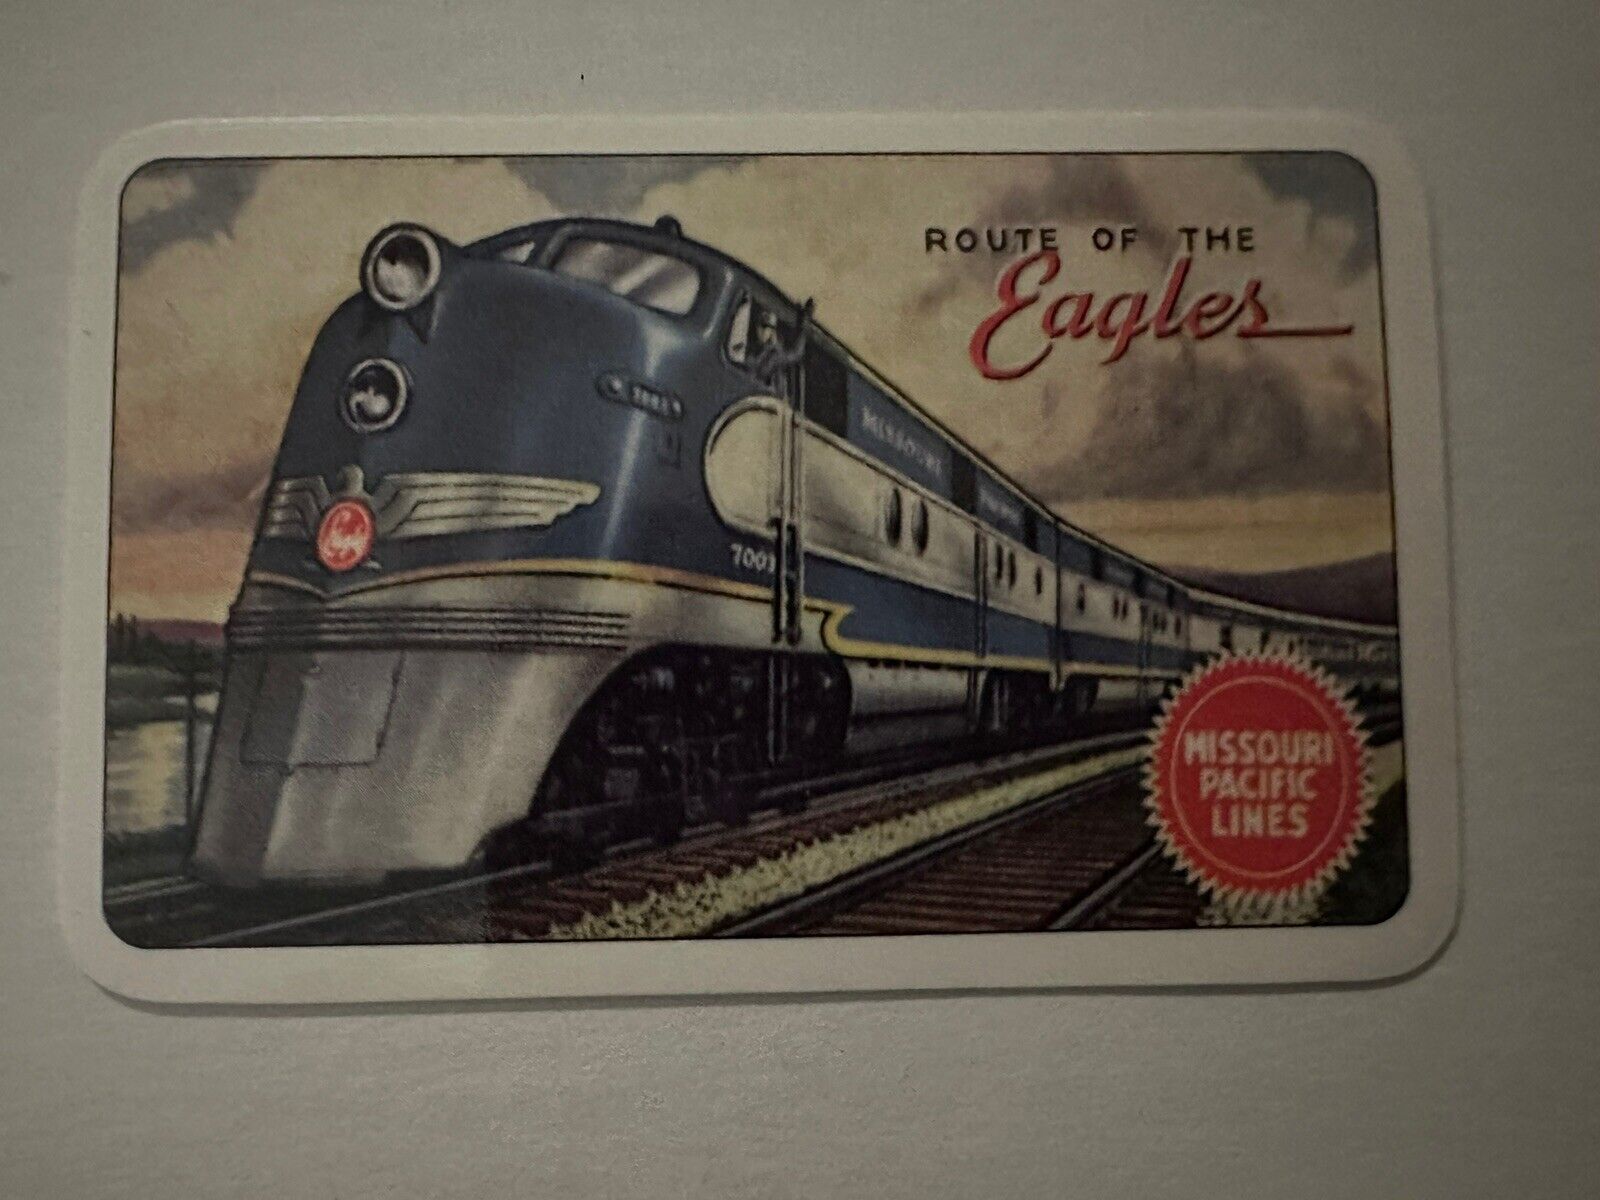 Missouri Pacific Lines Pocket Wallet Calendar Card Route of Eagles--1948 (1N)